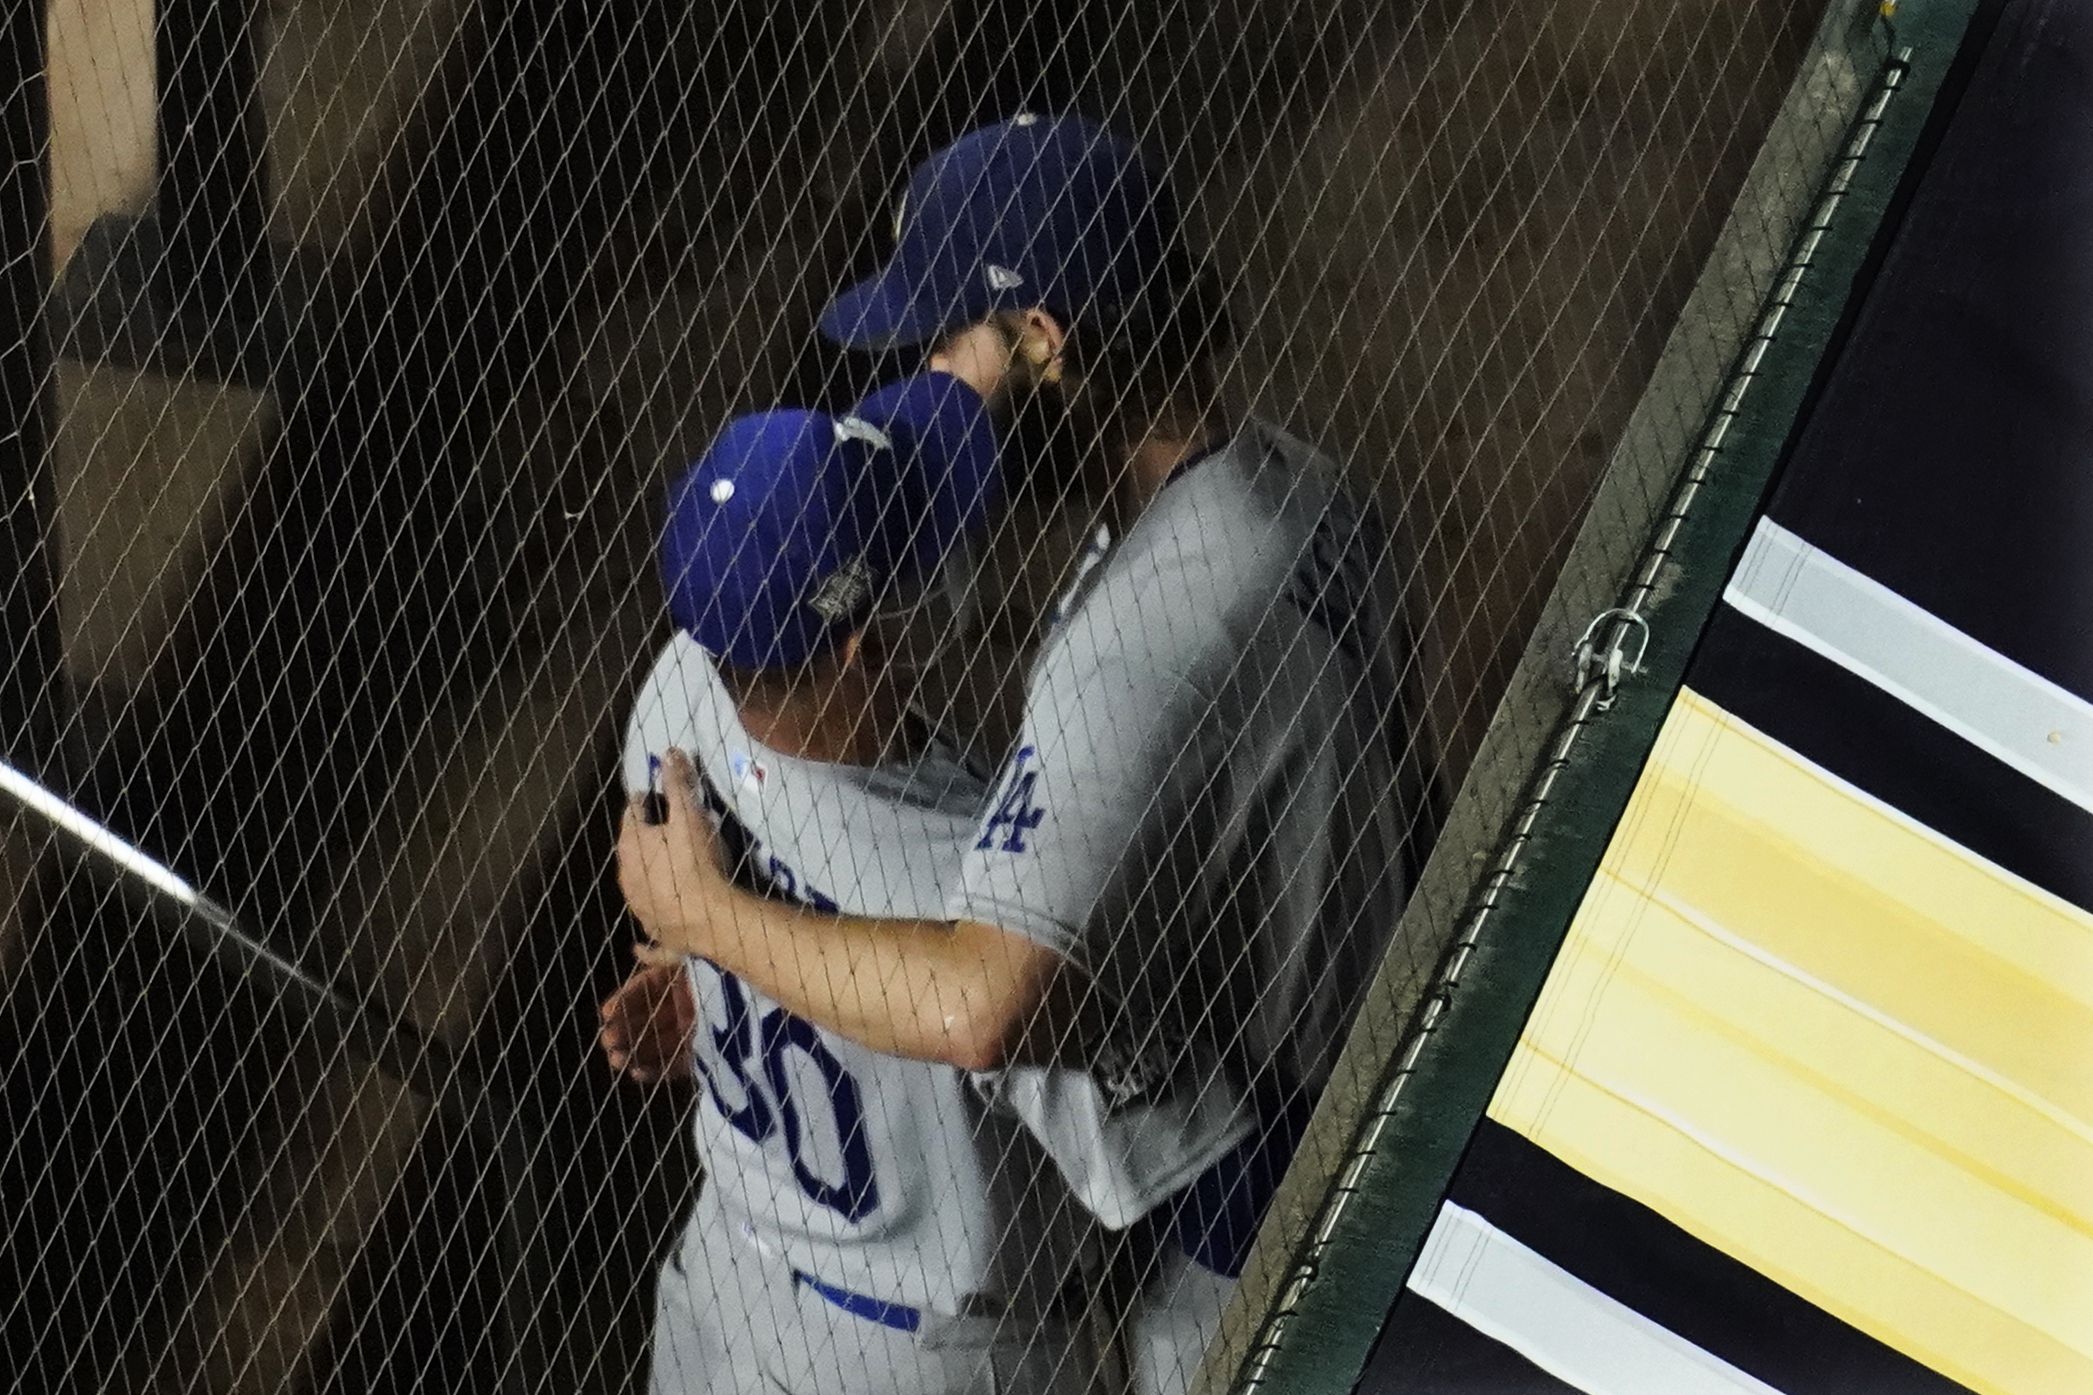 Clayton Kershaw stops steal of home, hands Dodgers 3-2 lead in